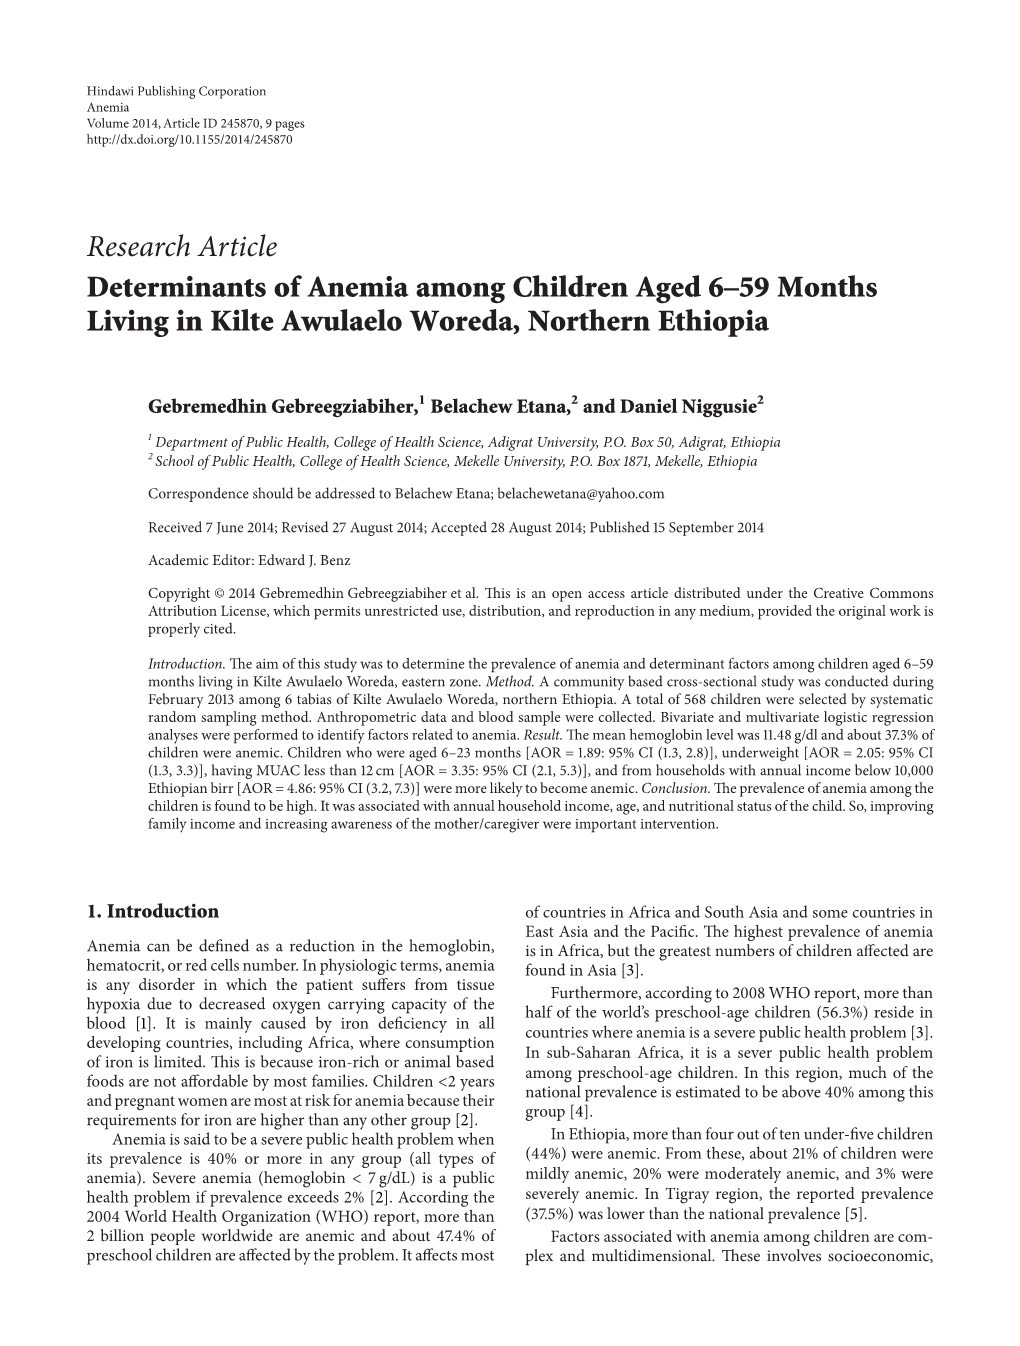 Determinants of Anemia Among Children Aged 6–59 Months Living in Kilte Awulaelo Woreda, Northern Ethiopia